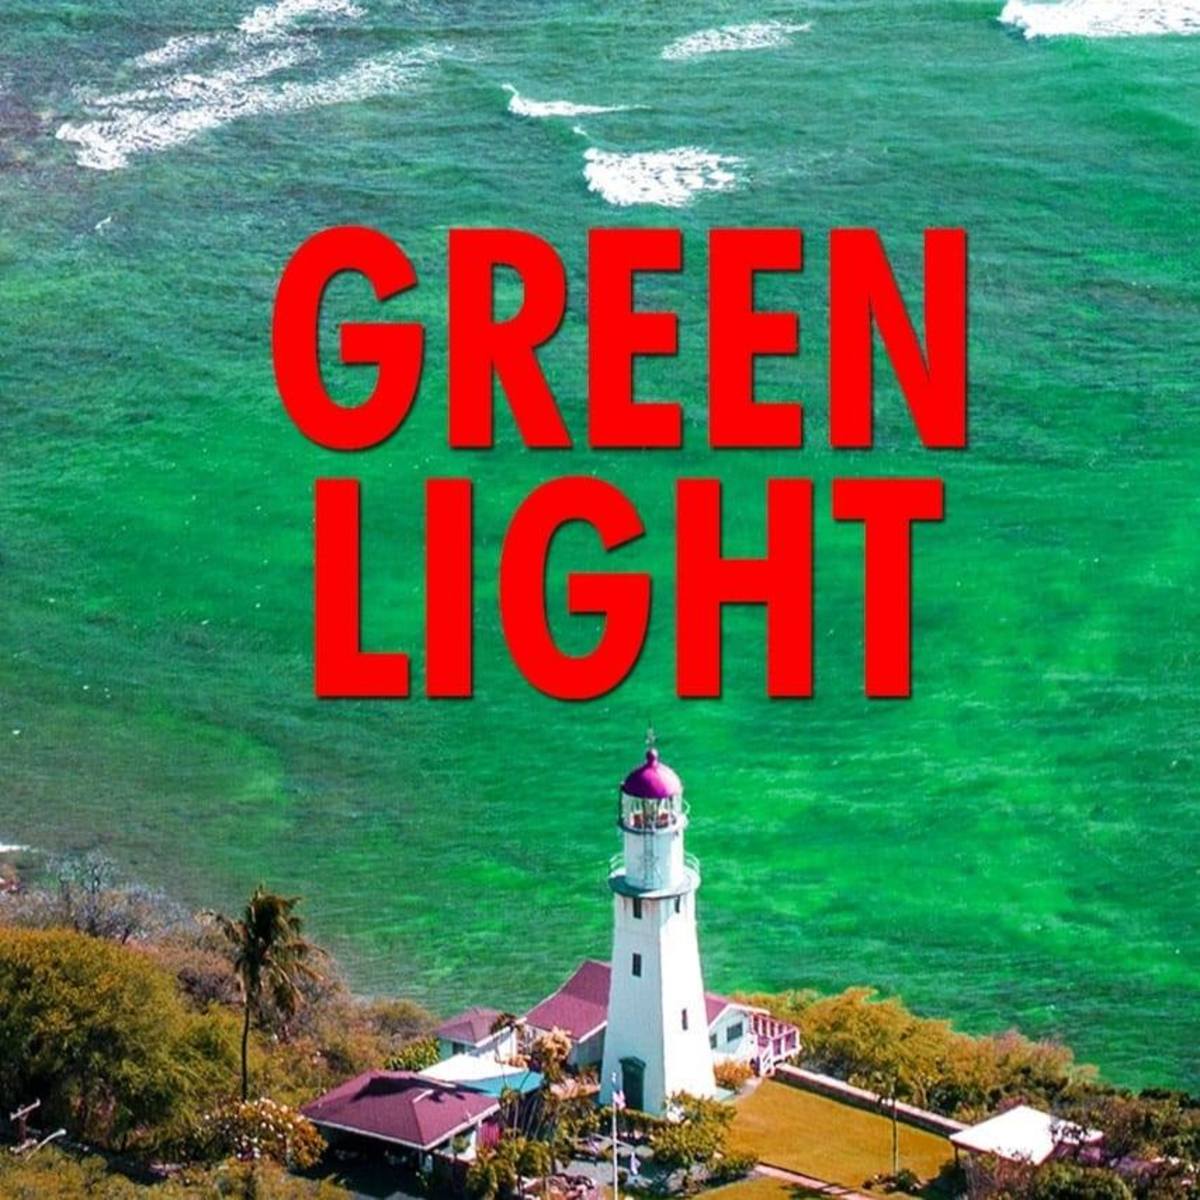 Green Light is a complete rip-off of the Great Gatsby plotline. That said, it might be worth checking out.